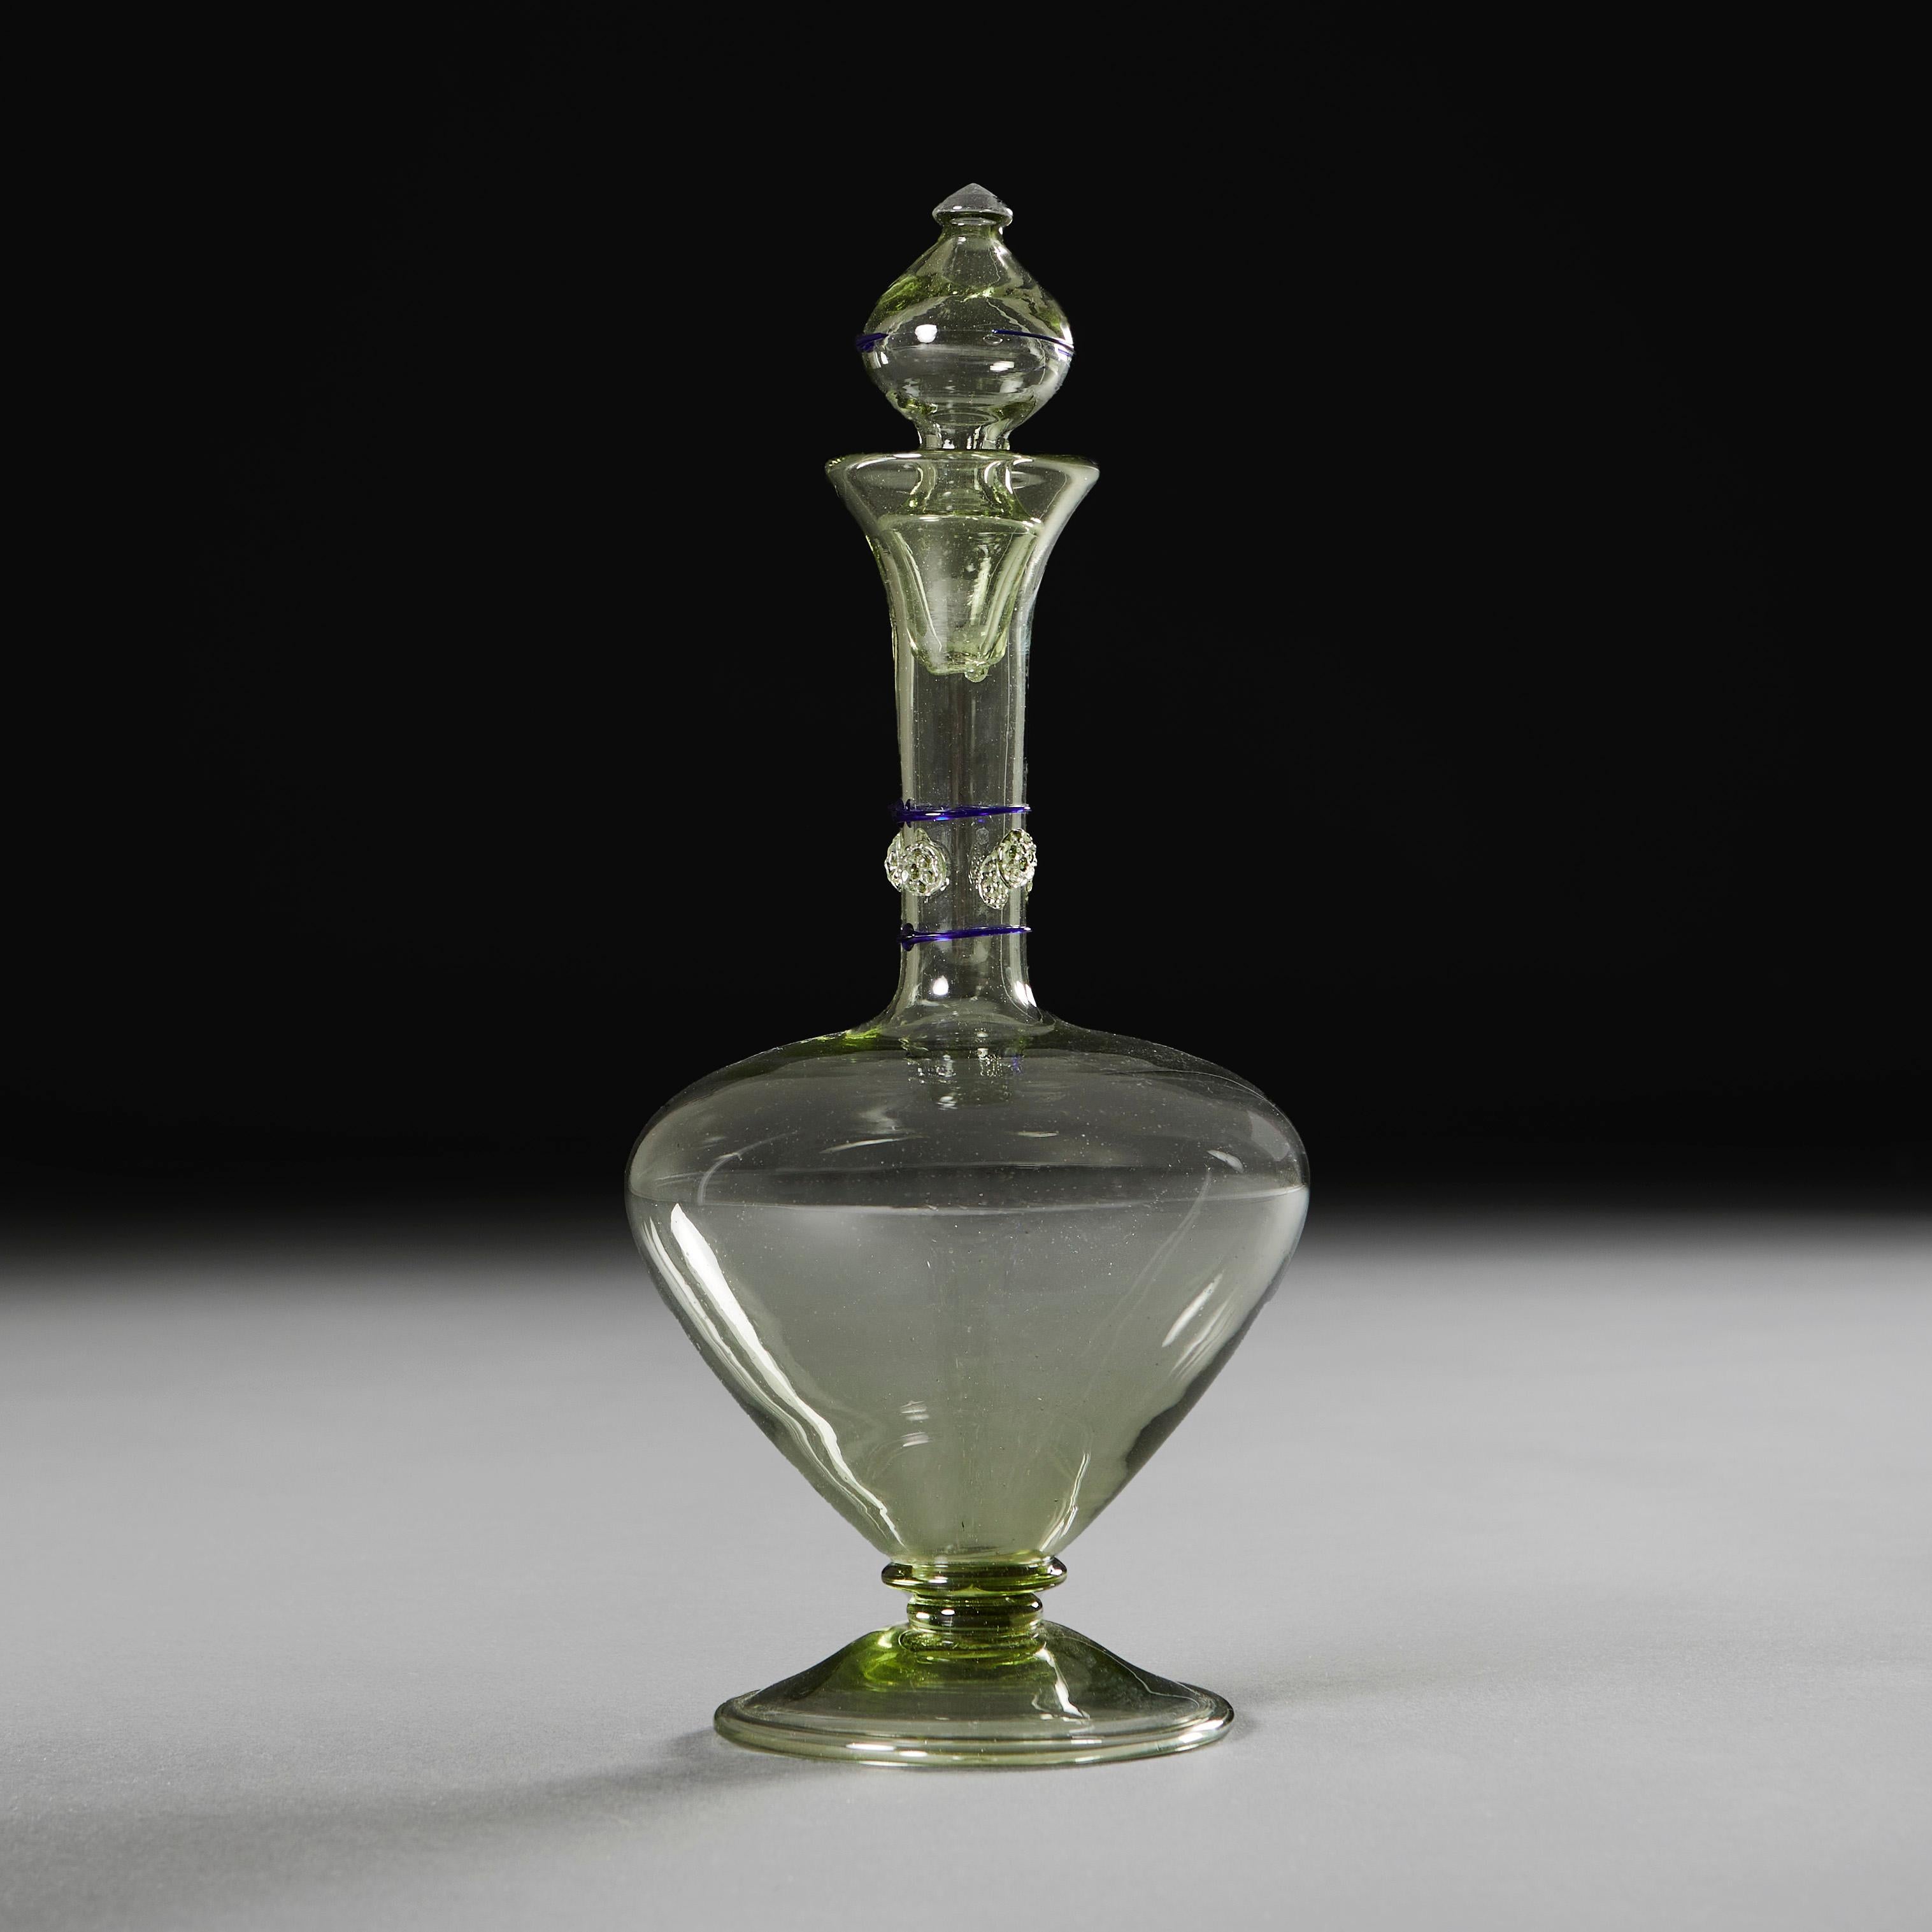 Italy, circa 1940

An early twentieth century Murano green glass decanter, with applied decoration to the neck and stopper, supported on a circular base.

Height   32.00cm
Diameter   11.00cm